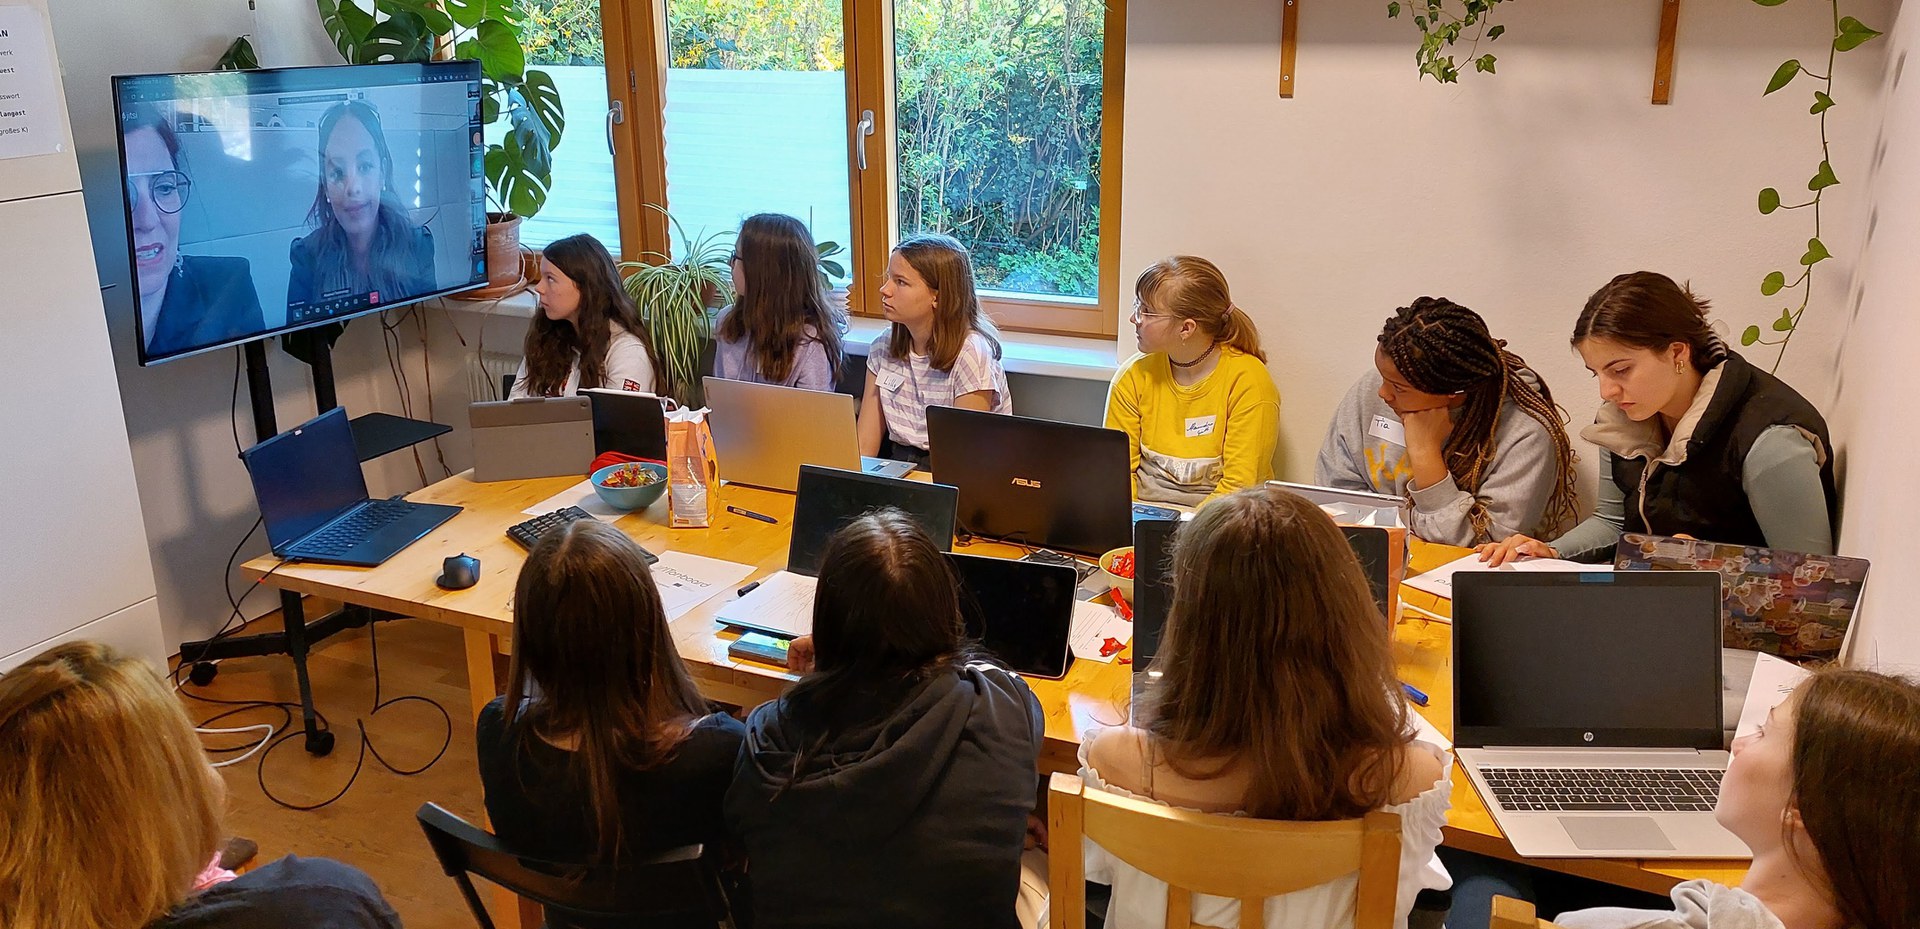 10 girls around a conference table watching an interview on a large screen.